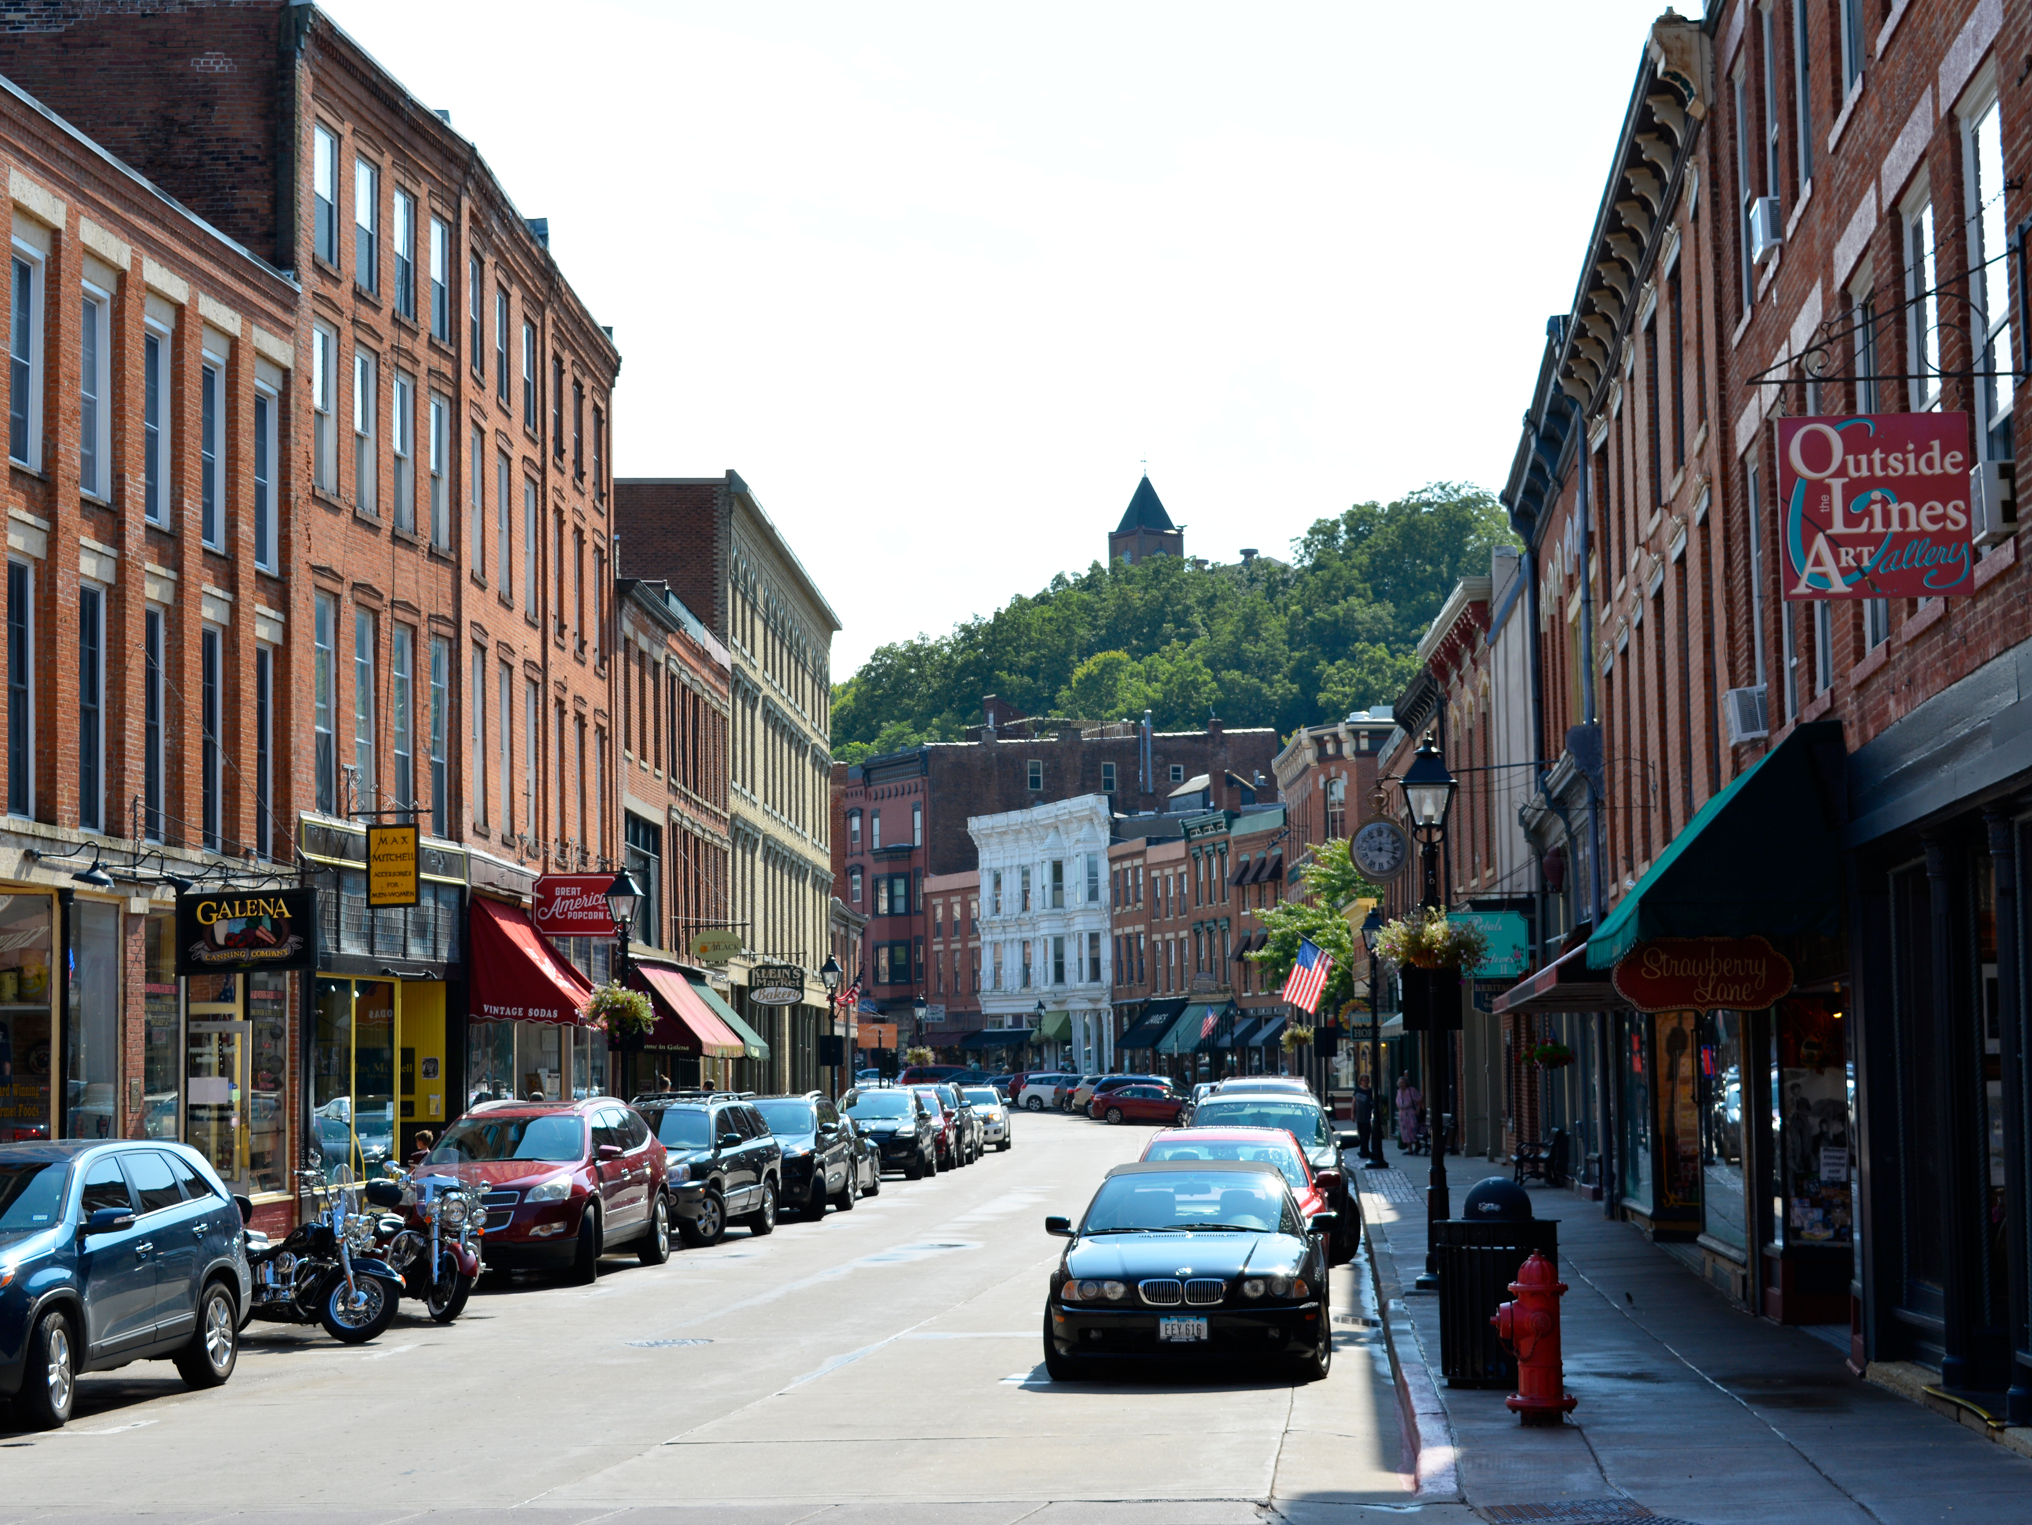 24 Hours in Galena, Illinois - Wh